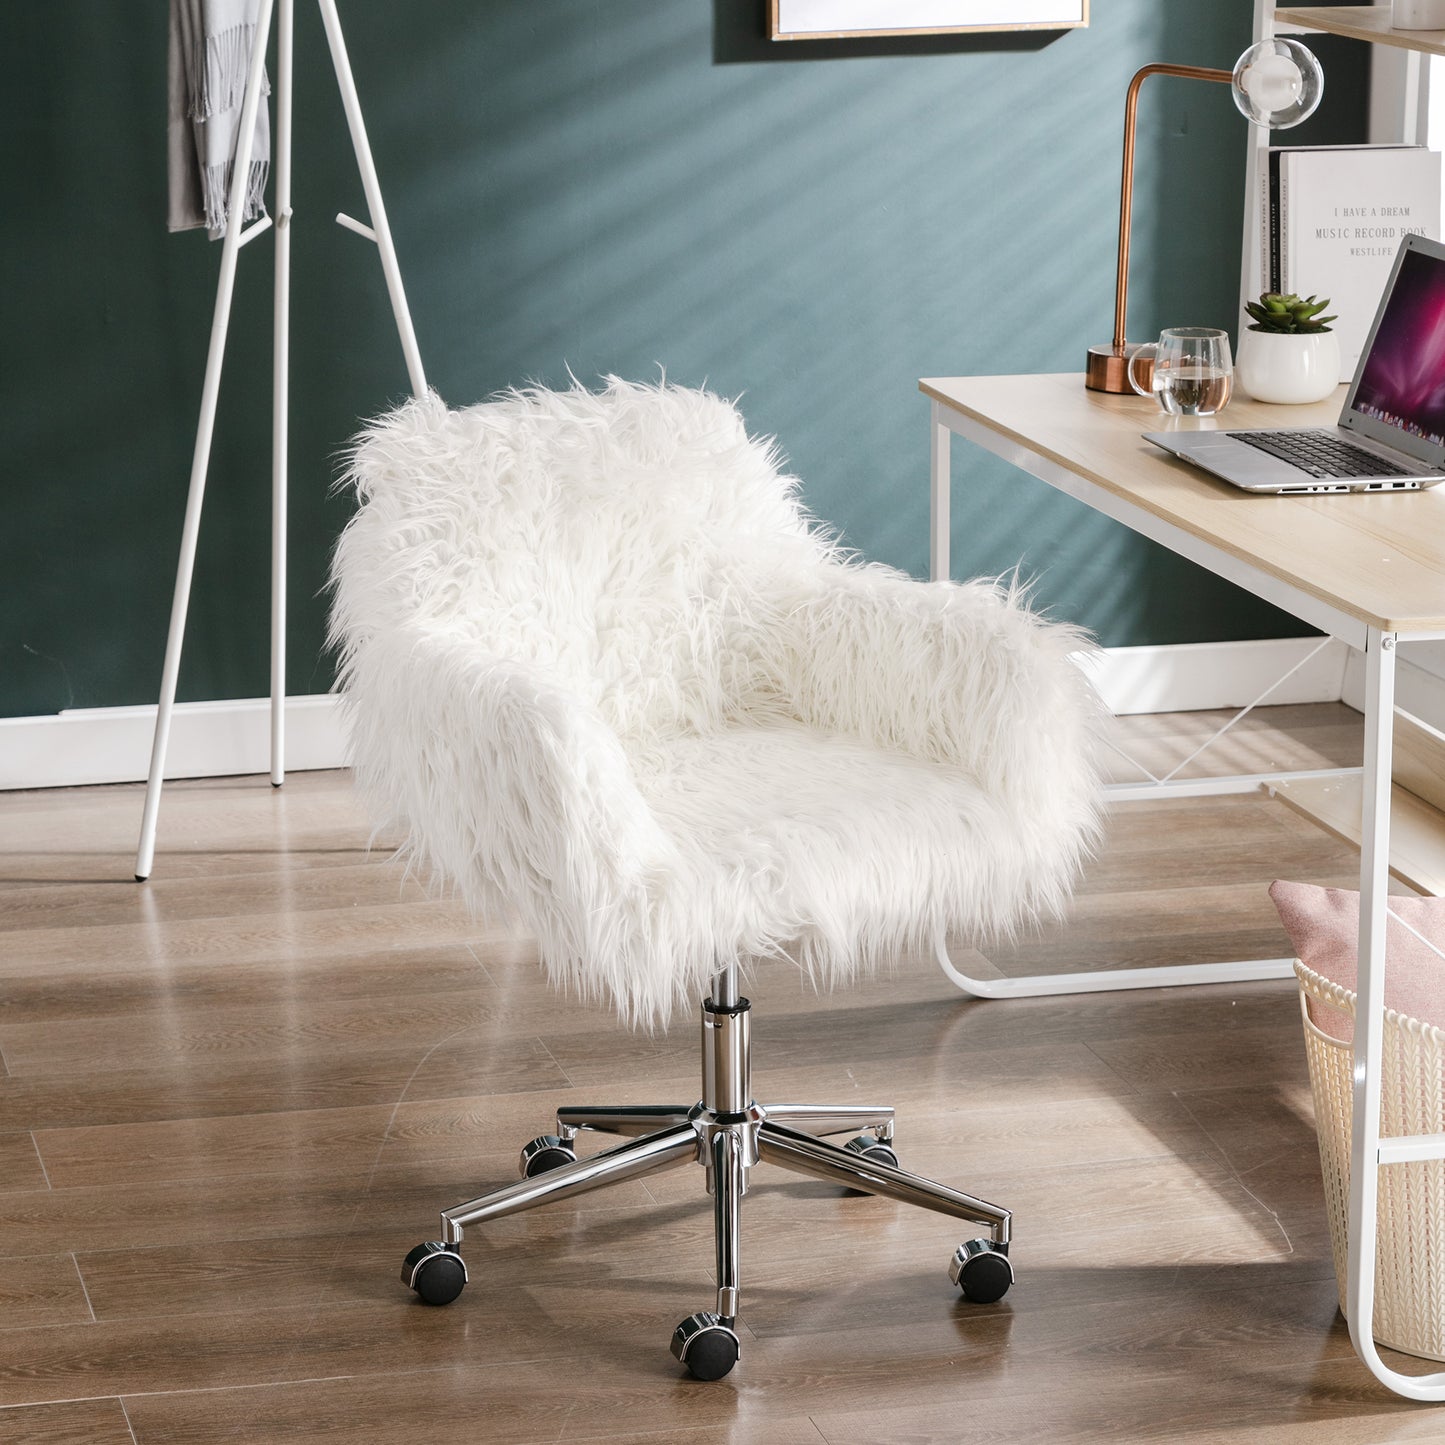 Office Chair, Fluffy Upholstered Desk Chair with Adjustable Height, 360 Degree Swivel and Metal Frame, Faux Fur Plush Seat and Back, Modern Office Computer Chair for Home Office, White, C20